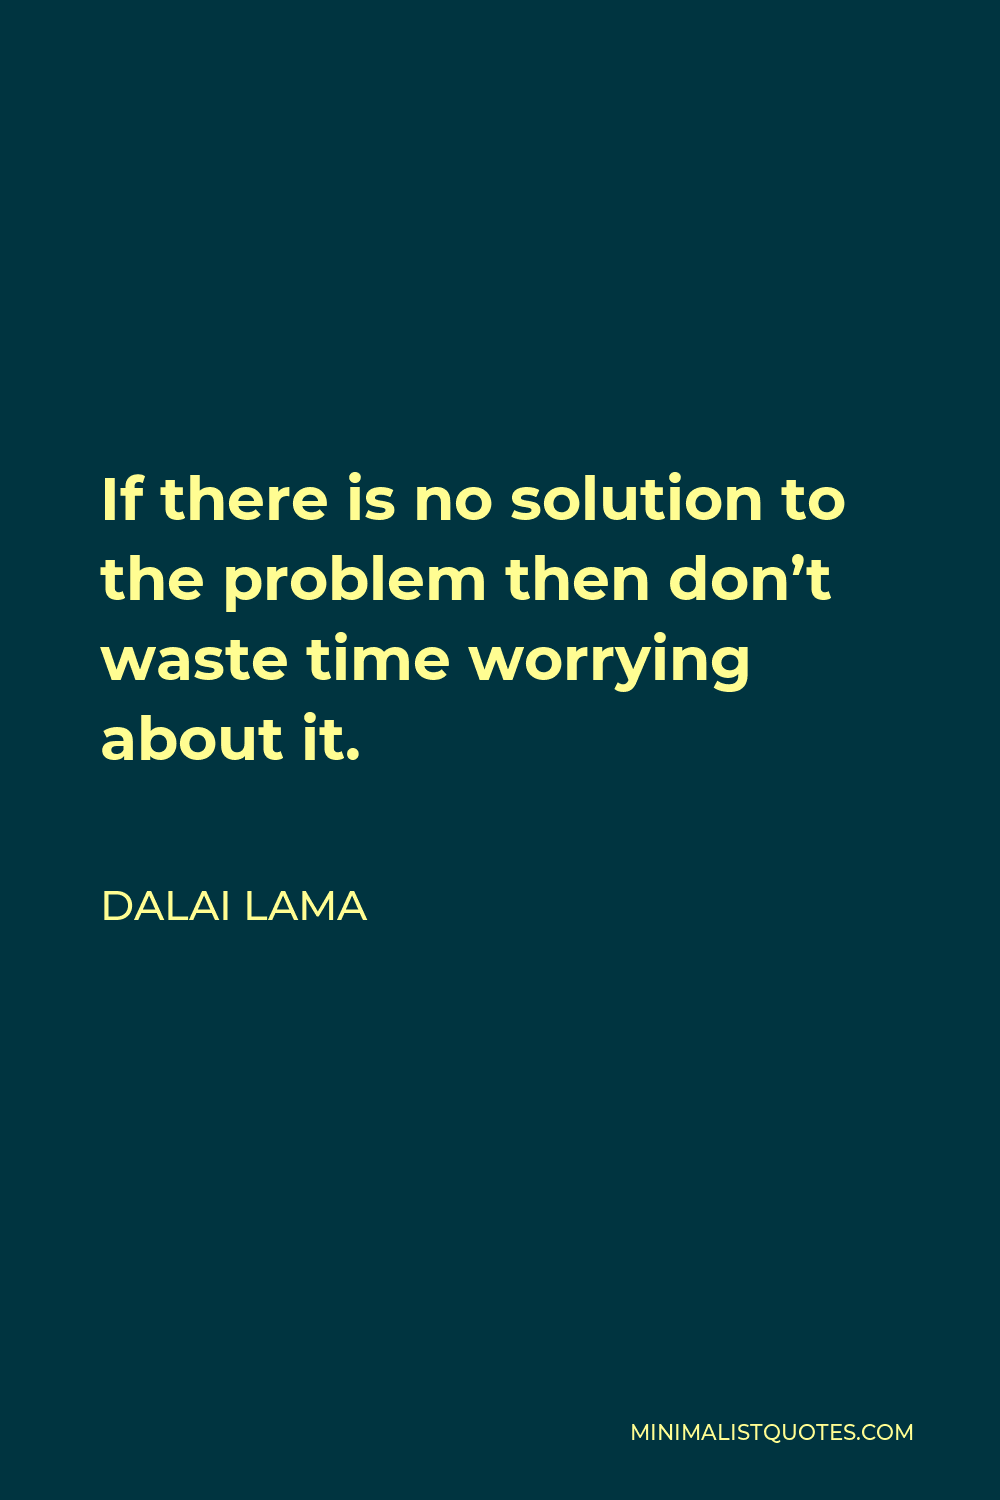 Dalai Lama Quote - If there is no solution to the problem then don’t waste time worrying about it.